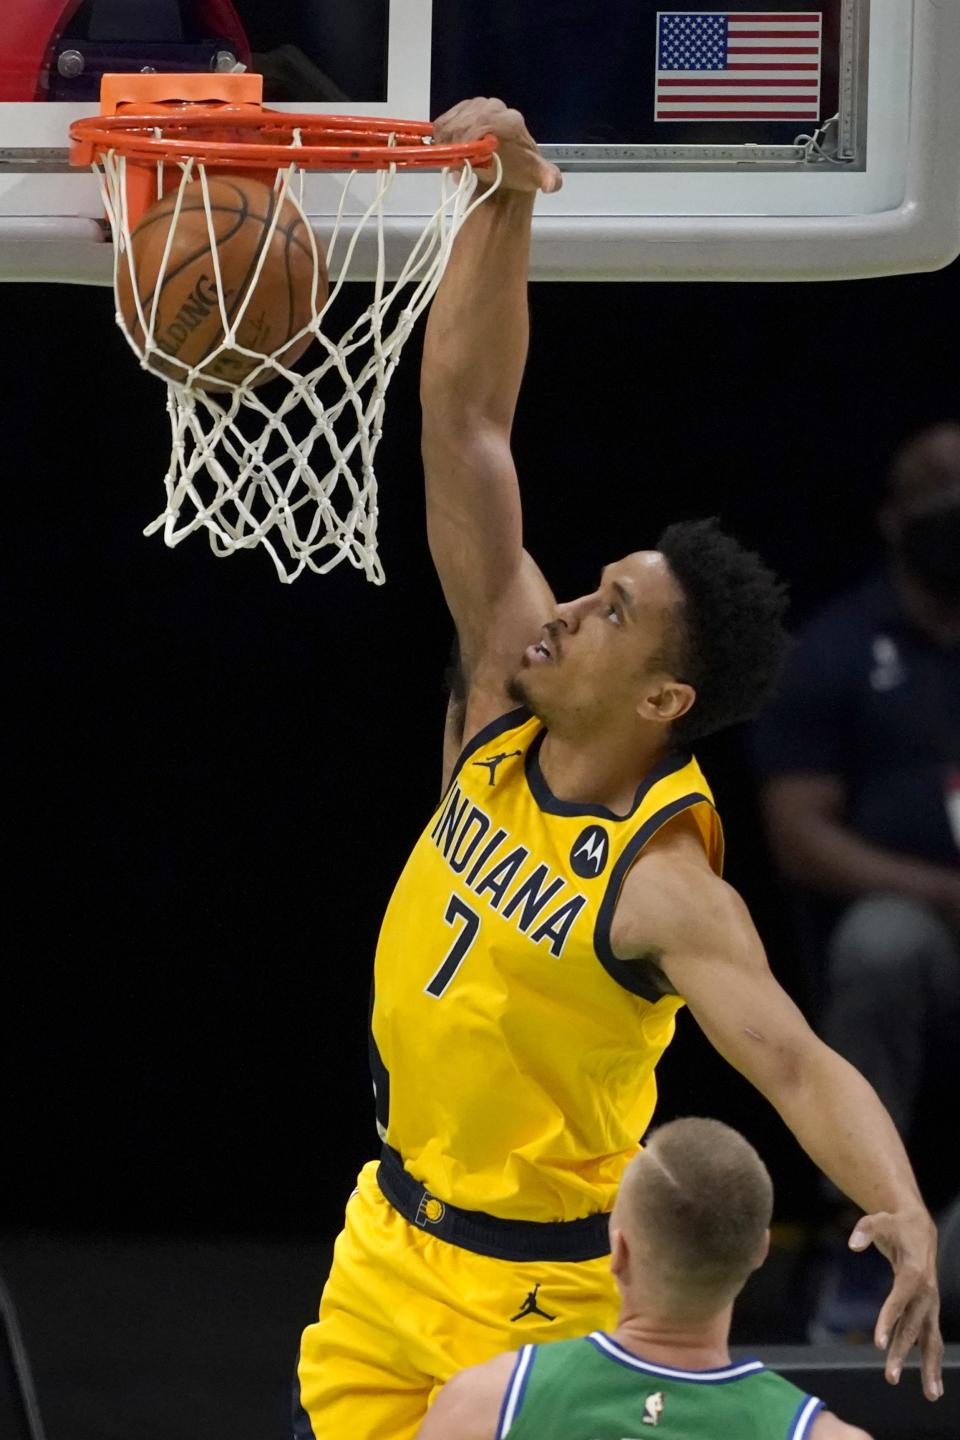 Indiana Pacers guard Malcolm Brogdon dunks during the first half of the team's NBA basketball game against the Dallas Mavericks in Dallas, Friday, March 26, 2021. (AP Photo/Tony Gutierrez)